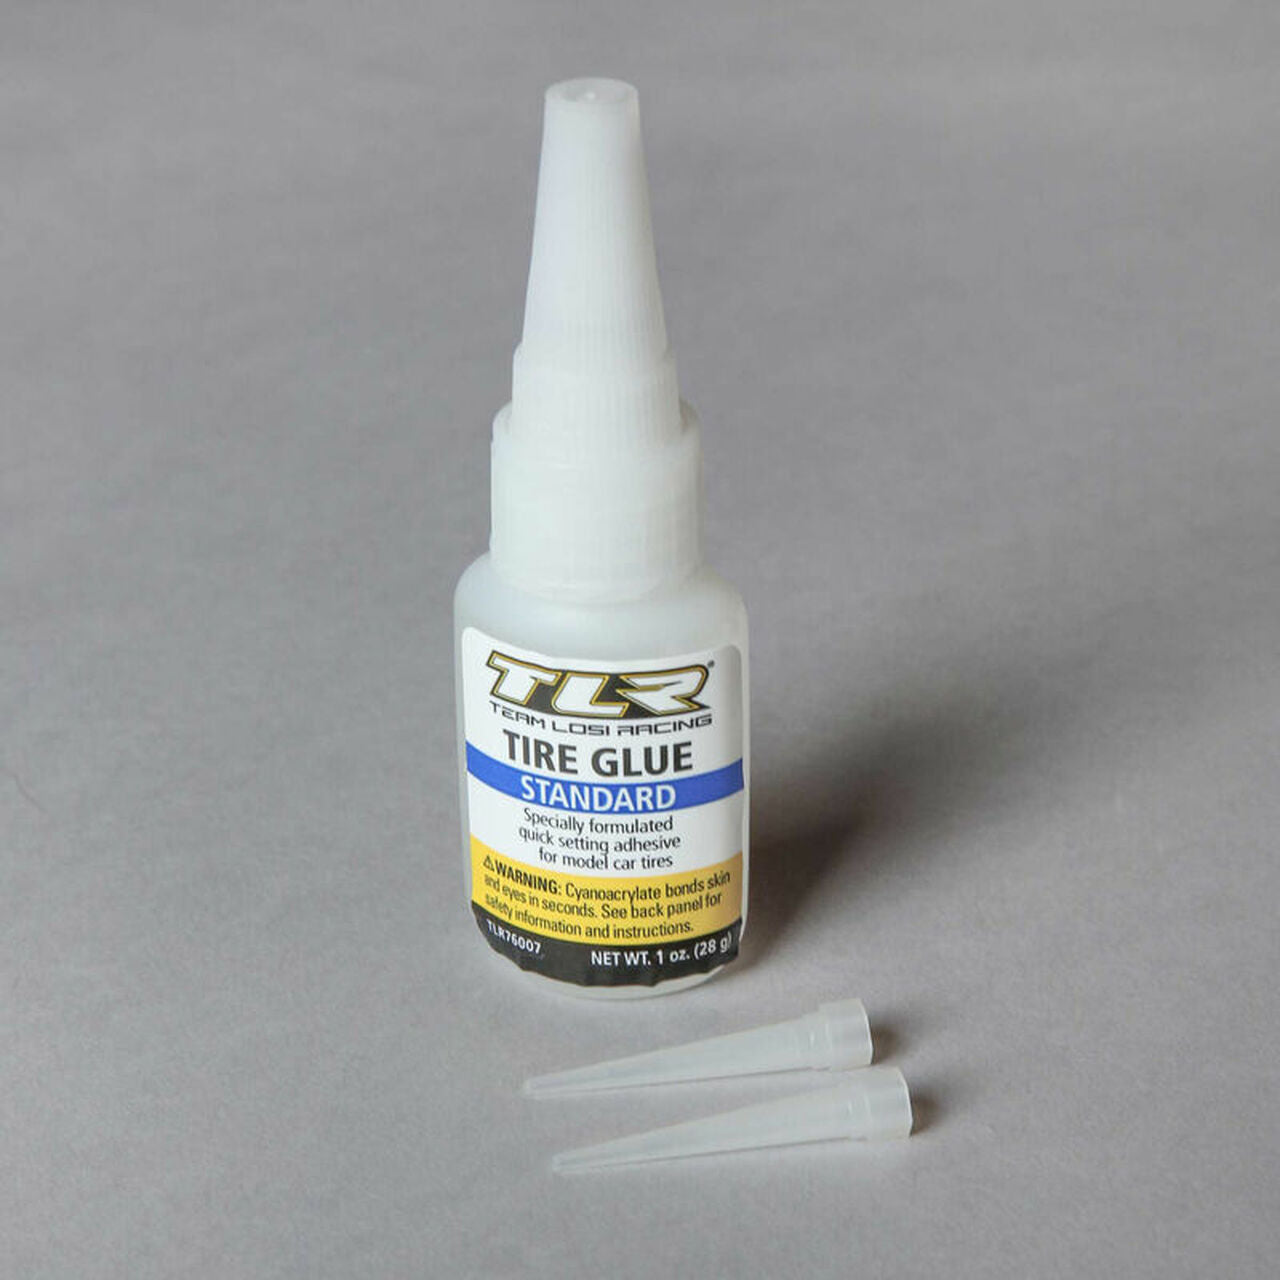 TLR TYRE GLUE 1OZ STANDARD *REPLACES AKA 38001